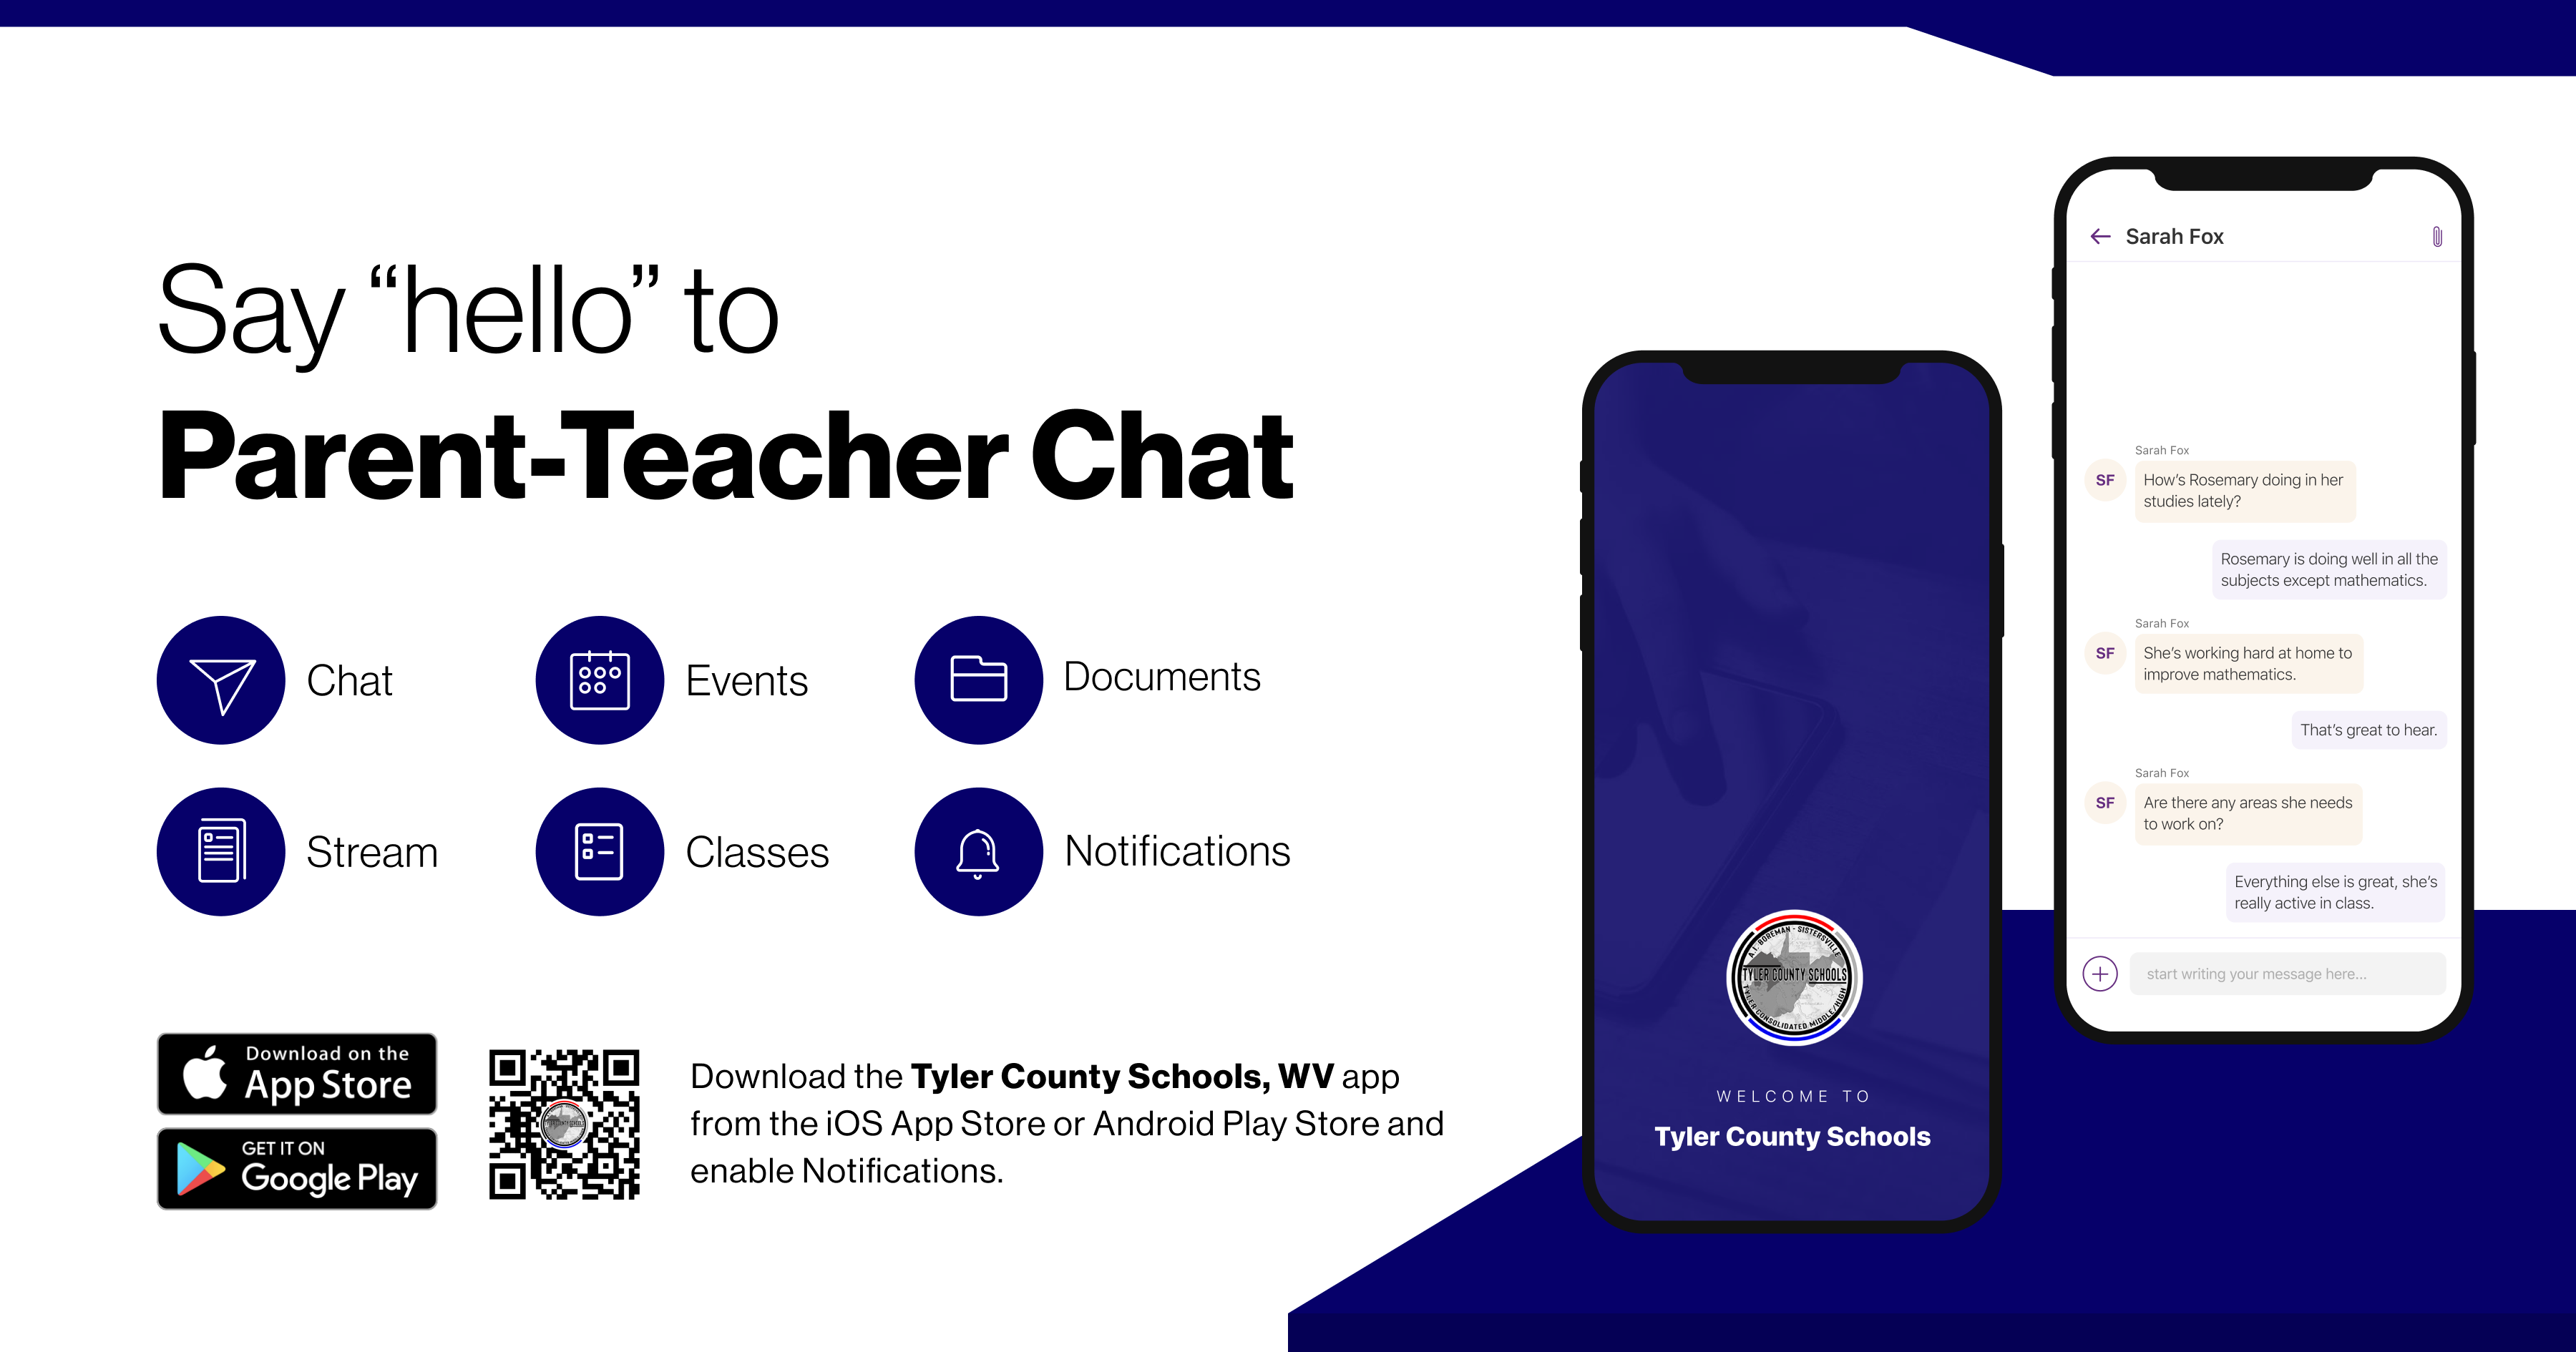 “Say hello to Parent-Teacher chat in the new Rooms app. Download the Tyler County Schools app in the Google Play or Apple App store.”